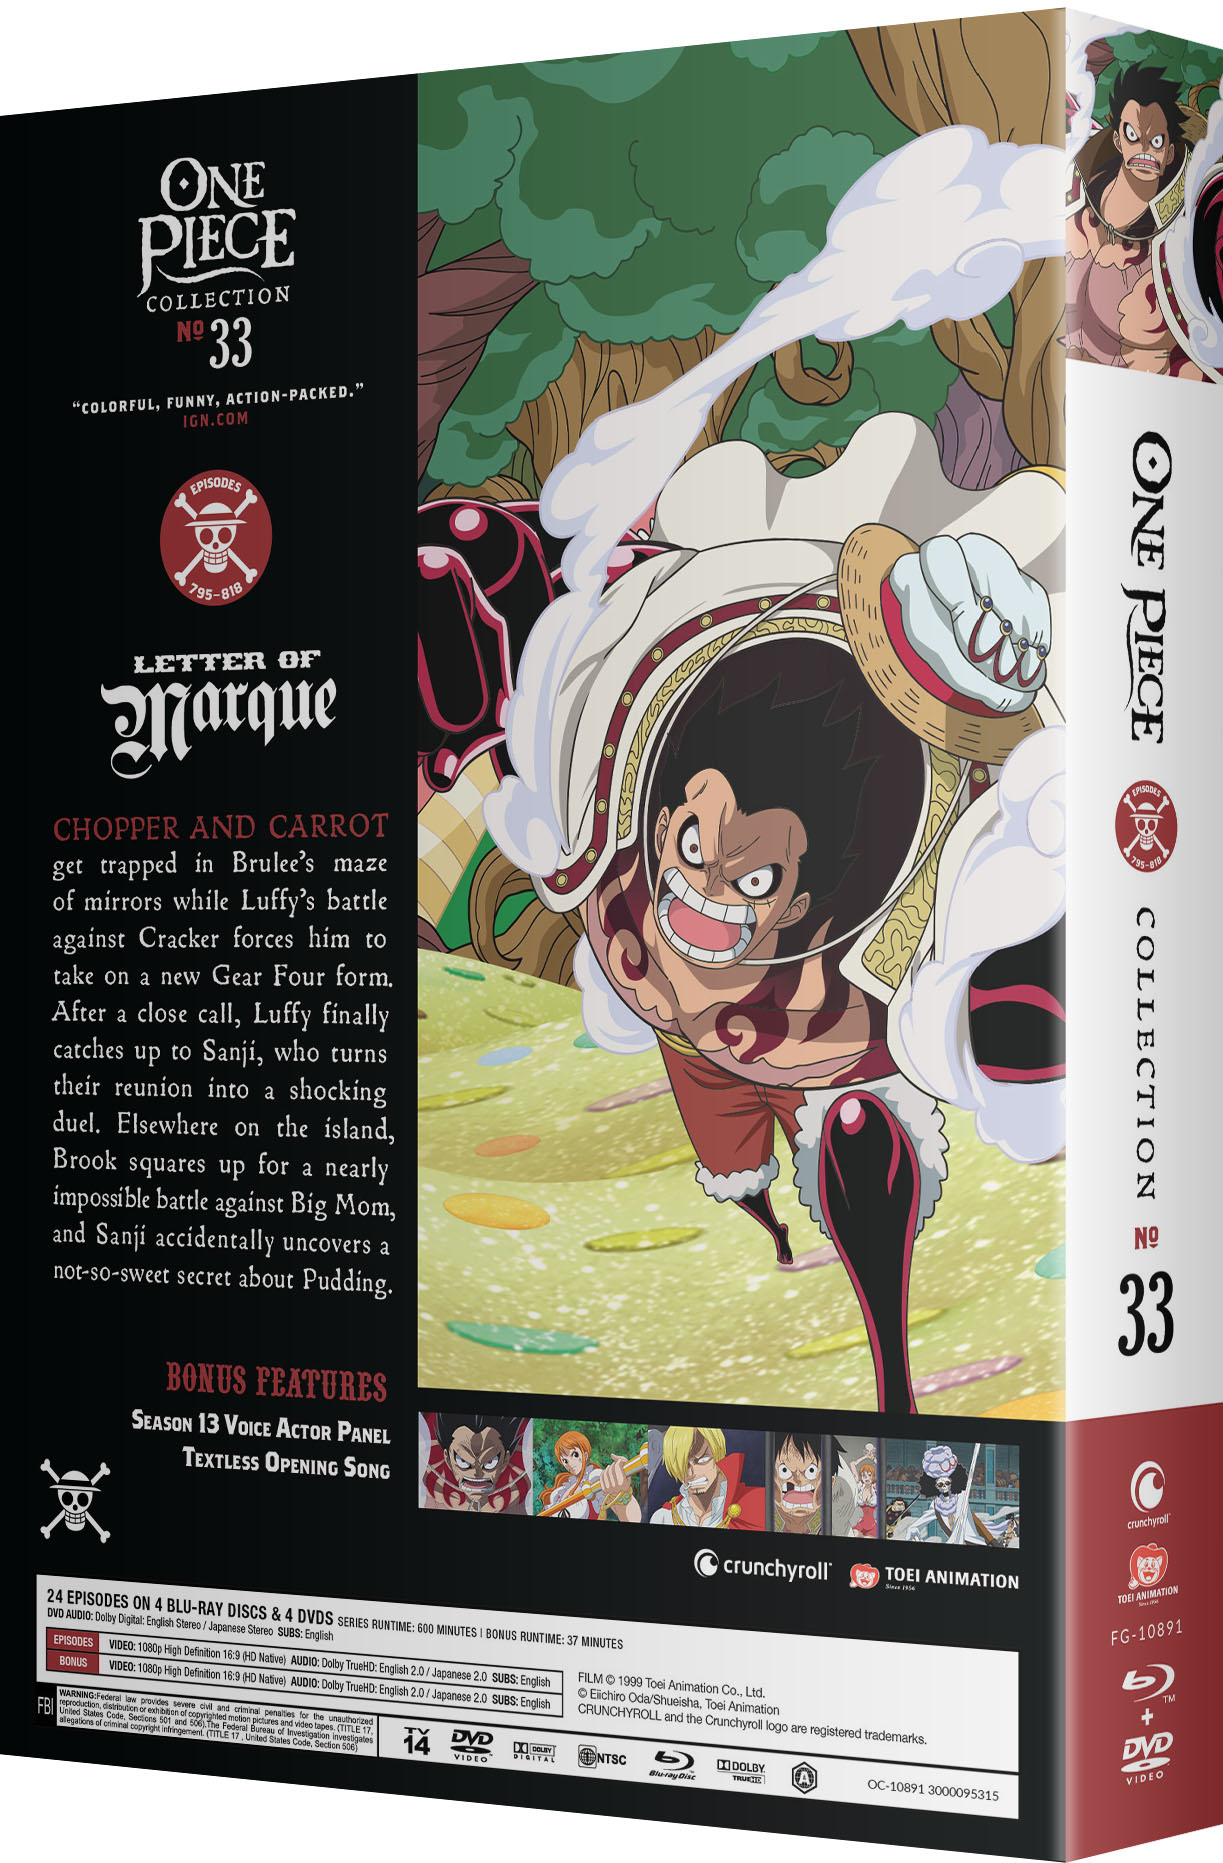 One Piece - Collection 33 - Blu-ray + DVD image count 1